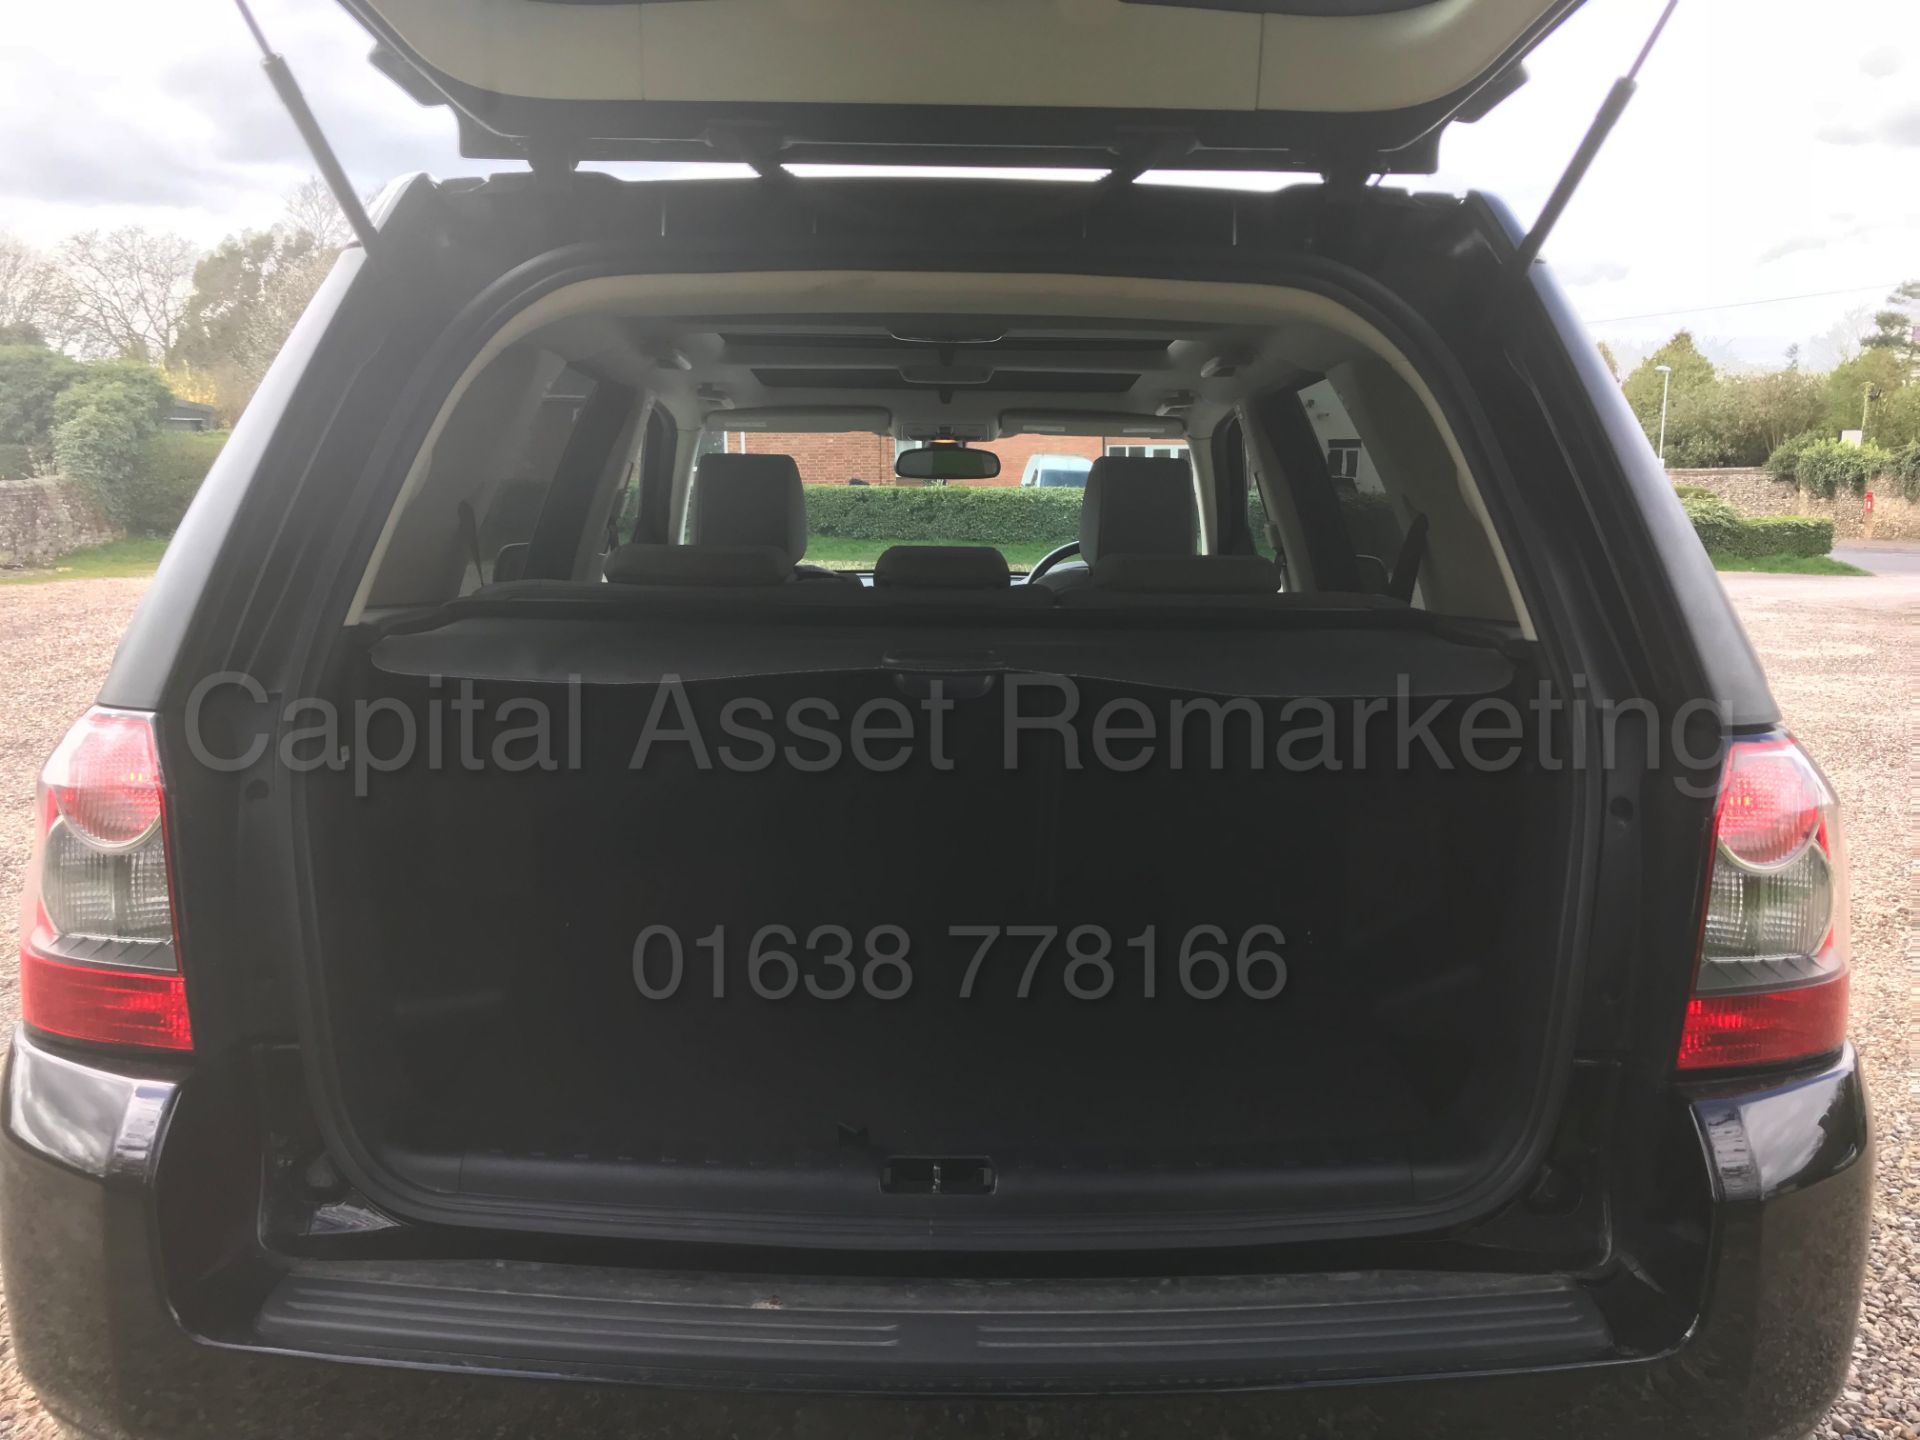 (On Sale) LAND ROVER FREELANDER 'HSE EDITION' (2011) '2.2 SD4 - AUTO' *SAT NAV - LEATHER - PAN ROOF* - Image 27 of 45